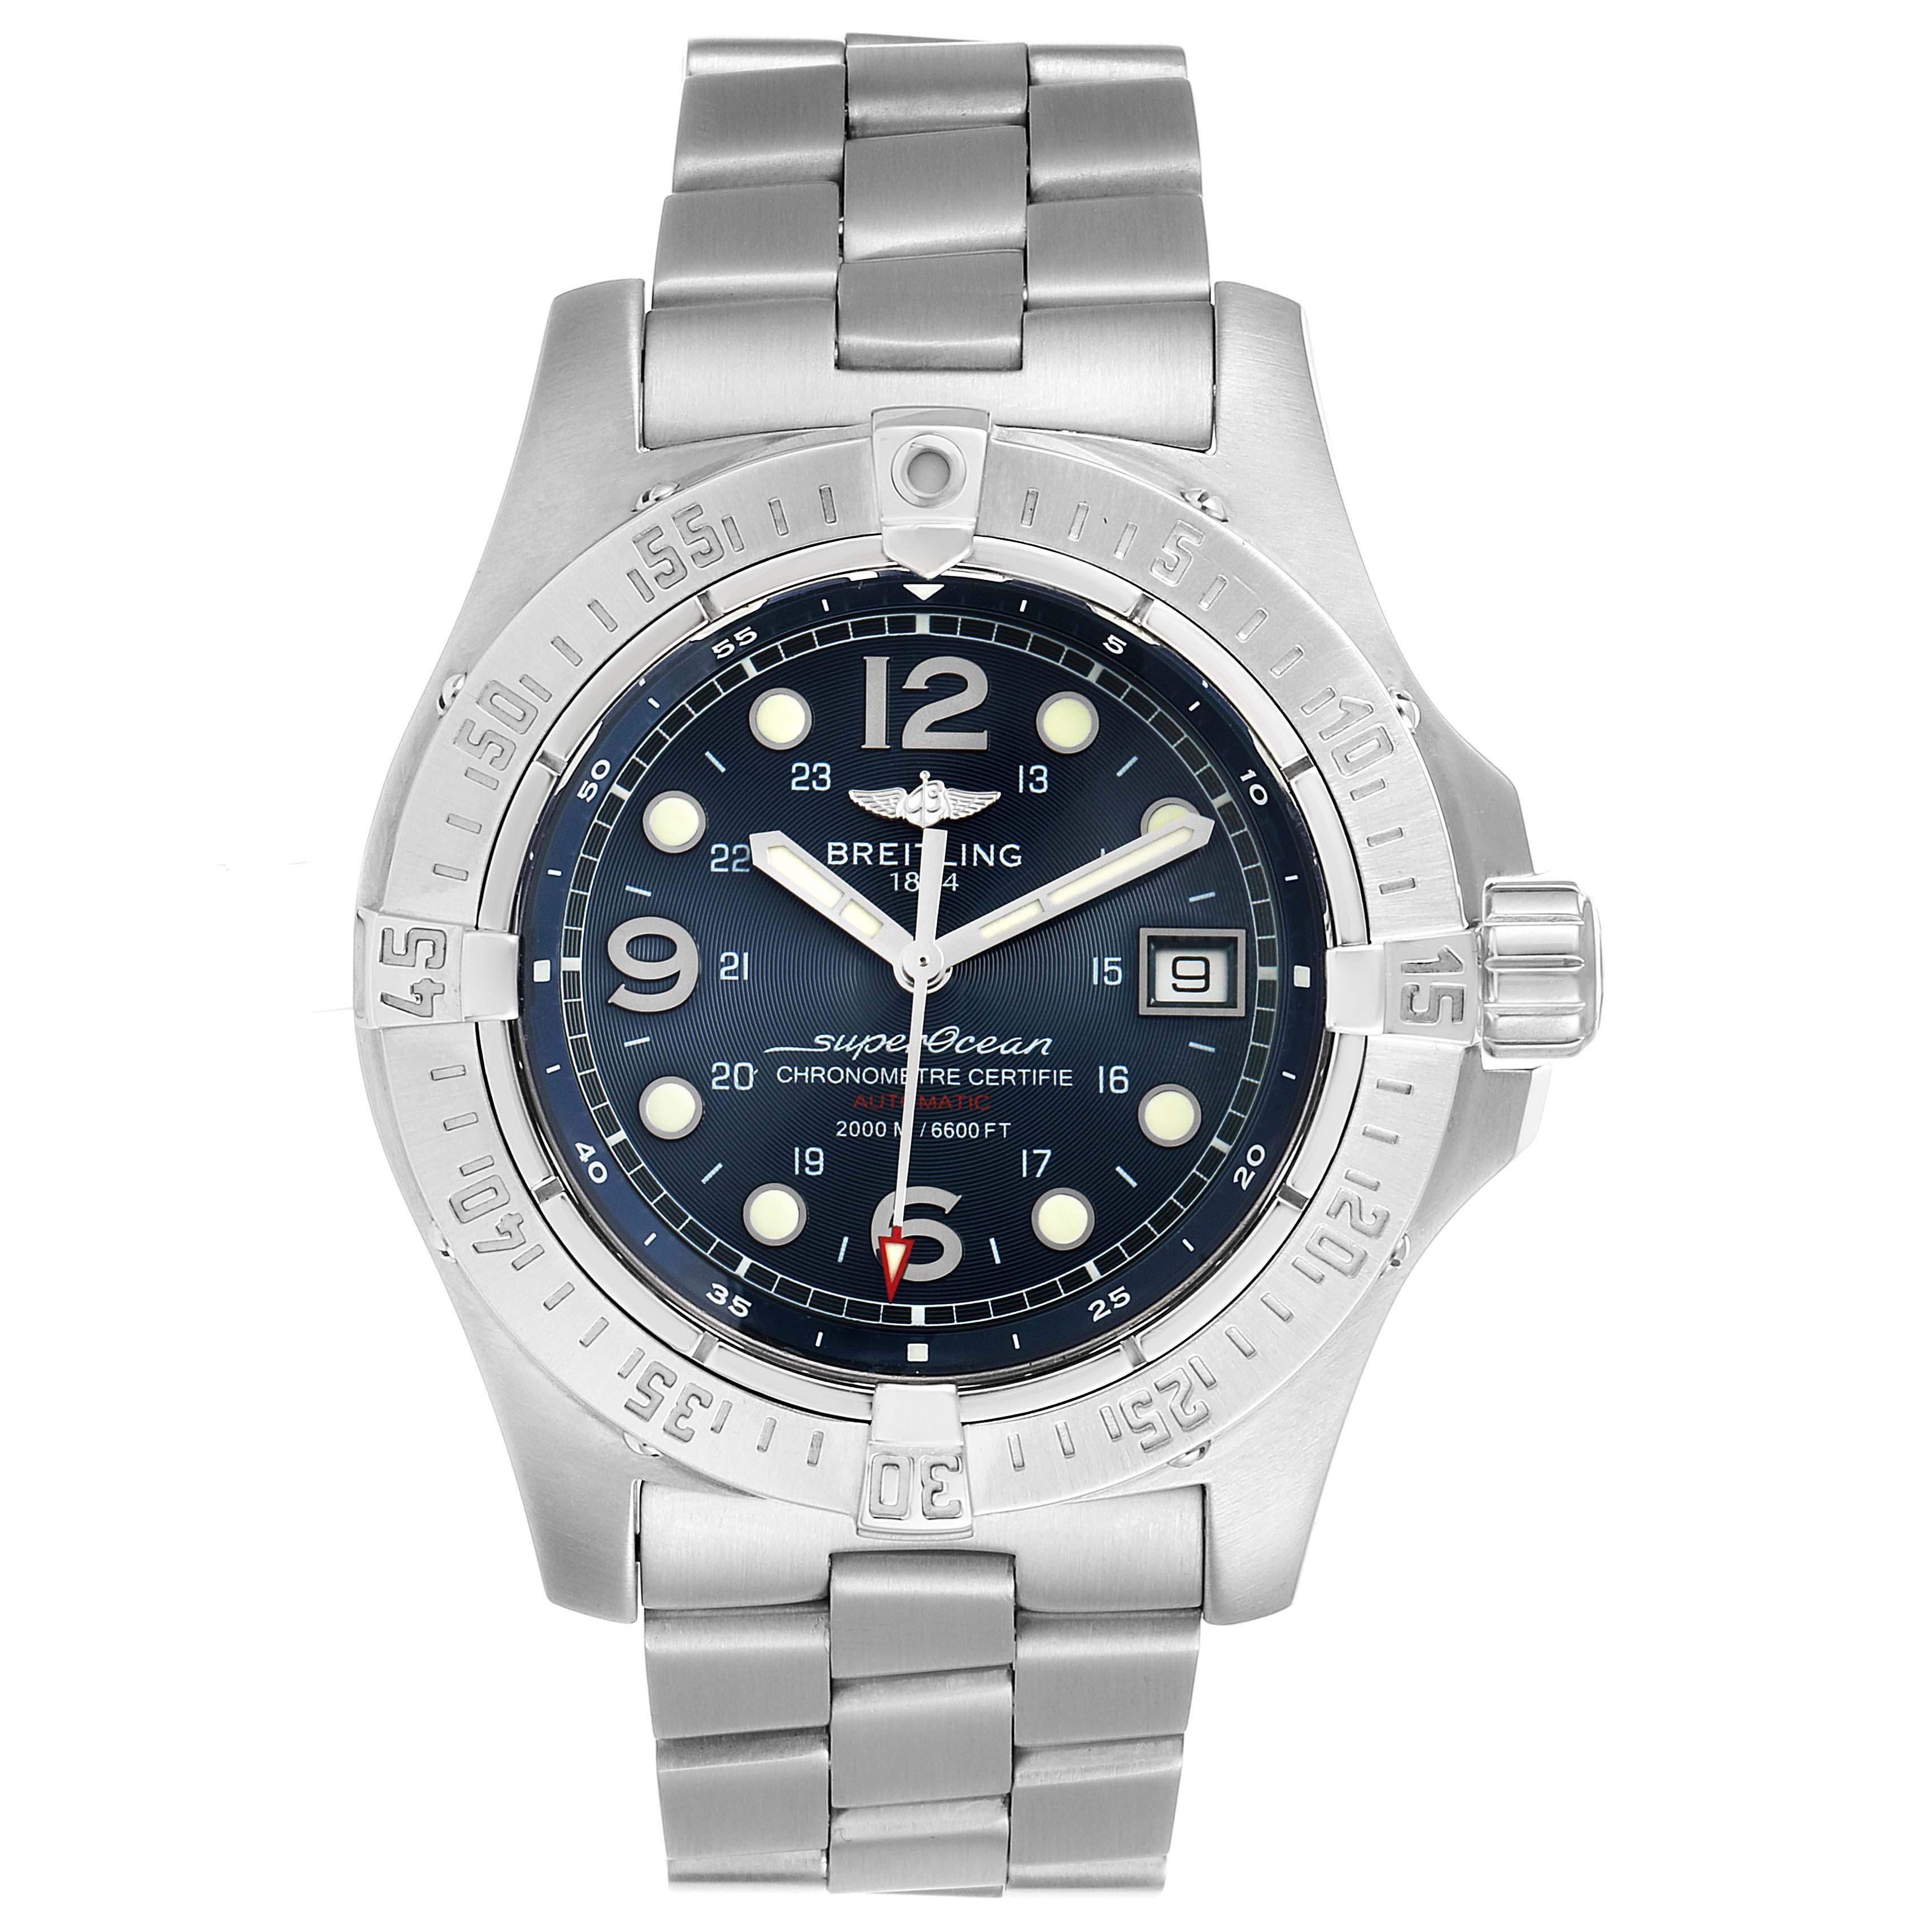 Breitling Aeromarine Superocean Steelfish Blue Dial Mens Watch A17390. Authomatic self-winding movement. Stainless steel case 44 mm in diameter. Stainless steel screwed-down crown and pushers. Stainless steel unidirectional revolving bezel. 0-60